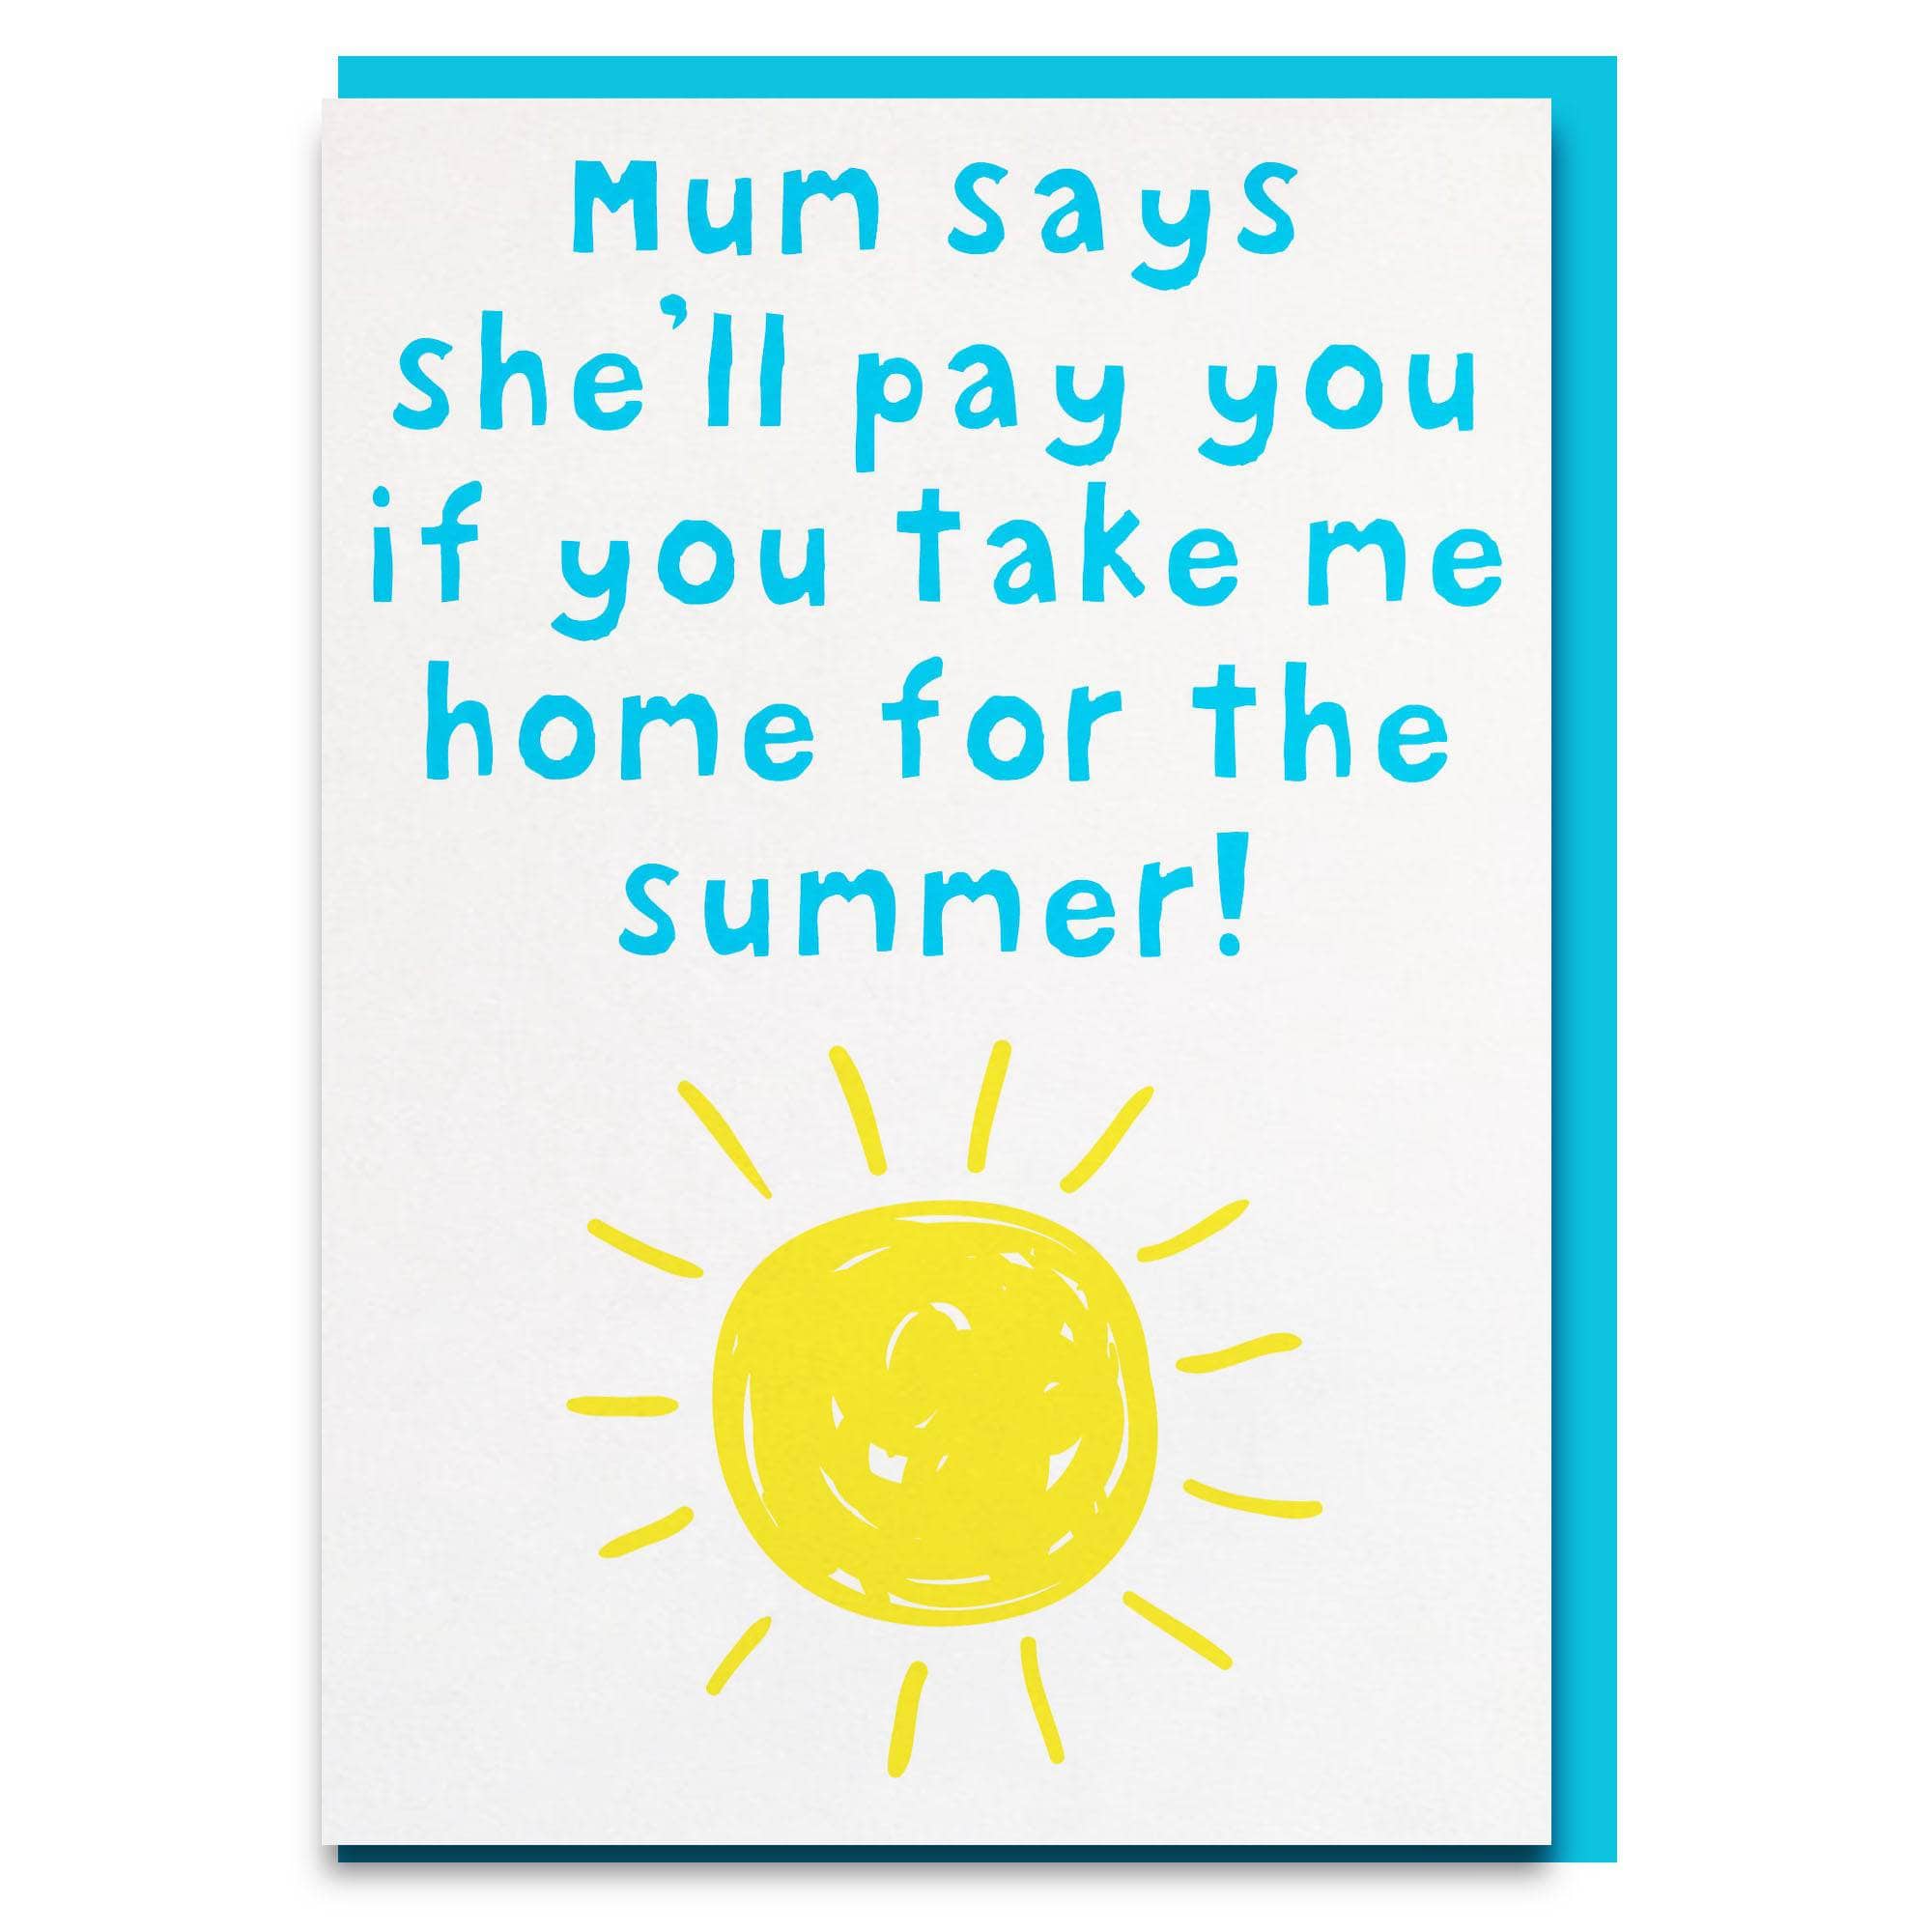 Funny and cheeky thank you card for teacher from parents